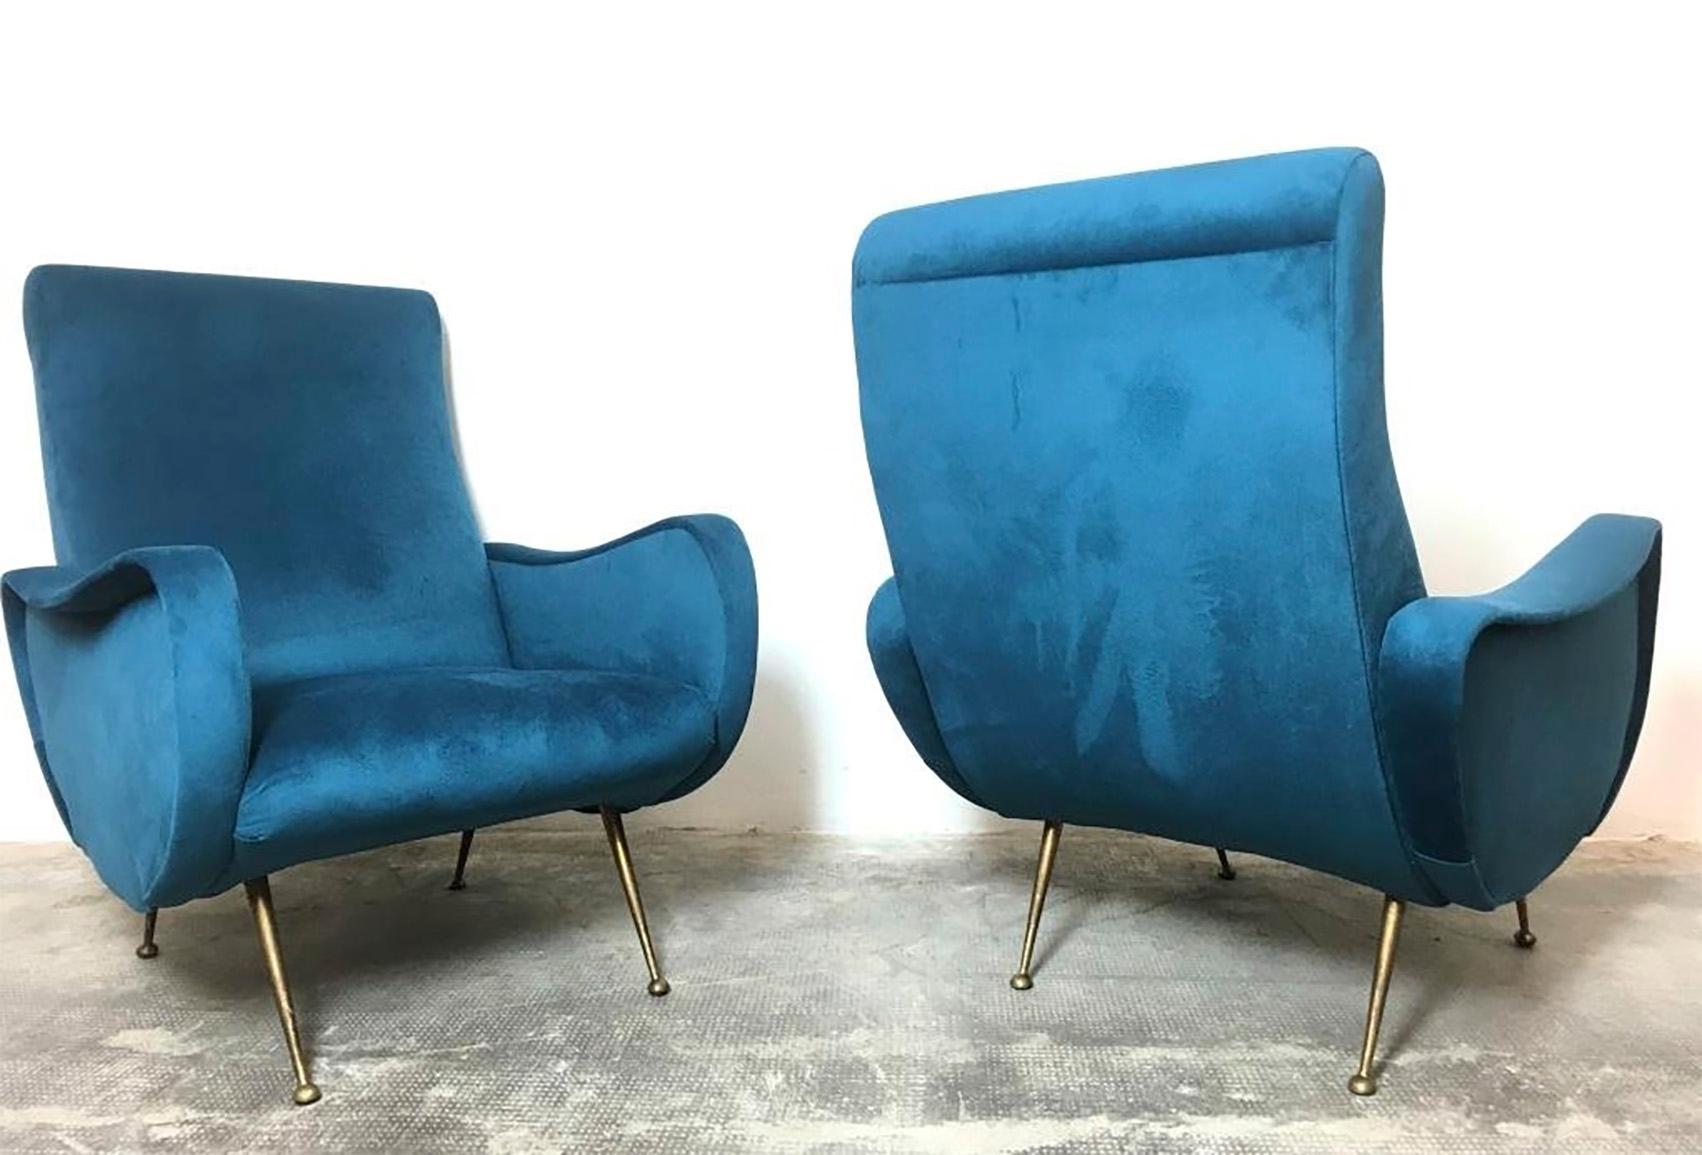 Marco Zanuso
2 lady armchairs,
circa 1950
This chair won the Gold Medal of the 9th triennial in Milan in 1951.
Gorgeous blue shaved velvet
Excellent condition
Measures: 90 x 73 x 85
3900 Euros per pair.